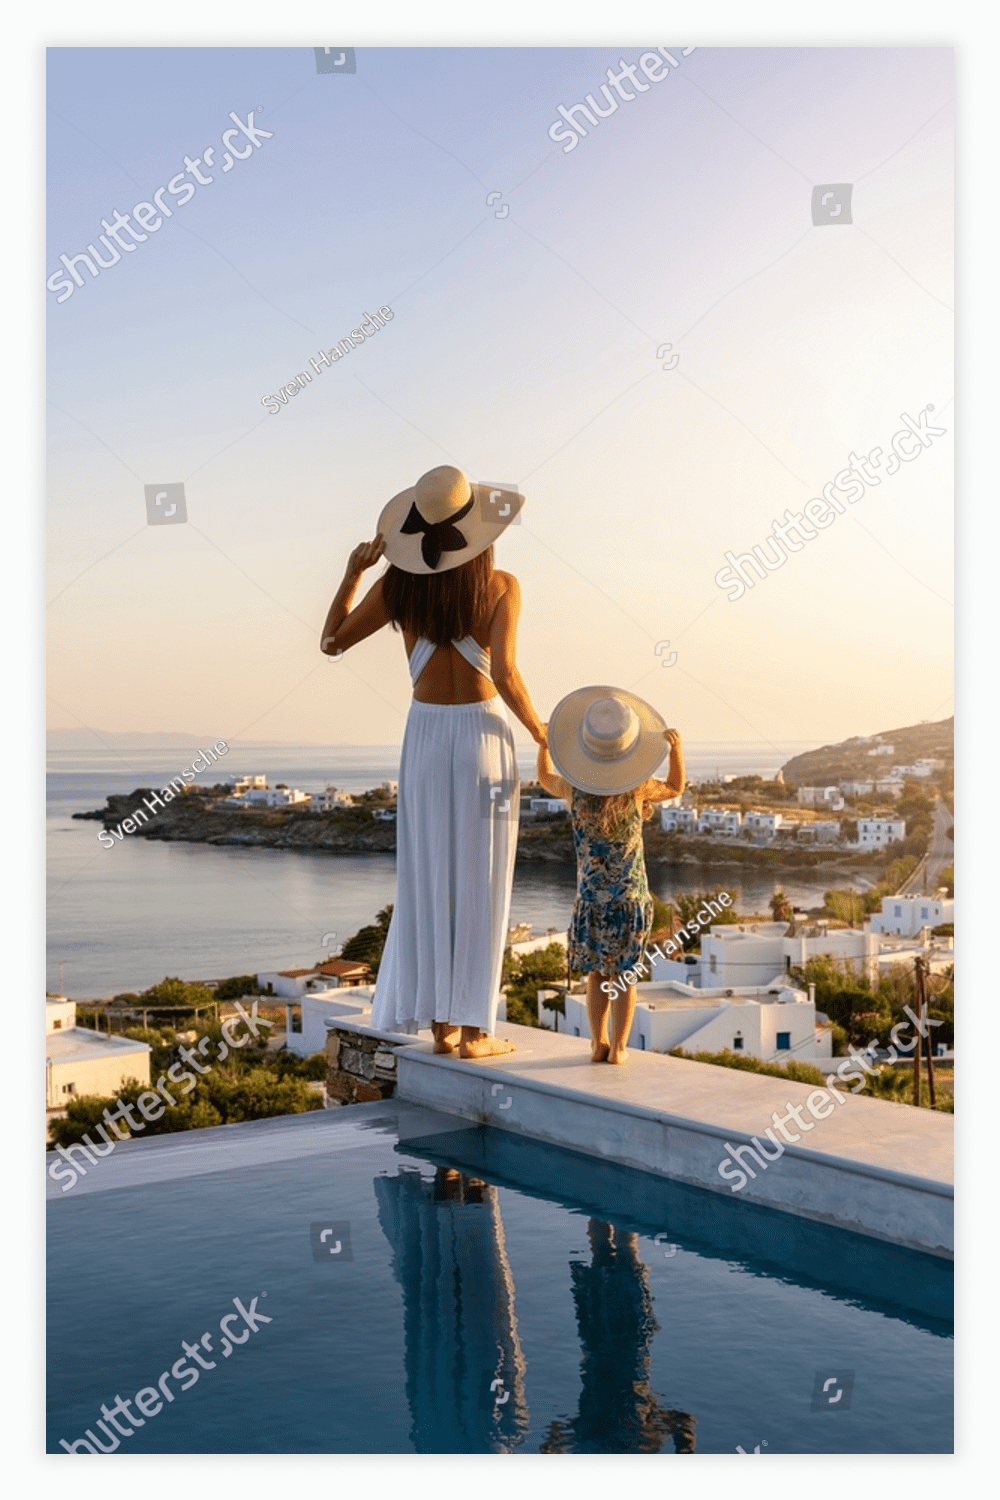 Woman and a child standing on the edge of a swimming pool.